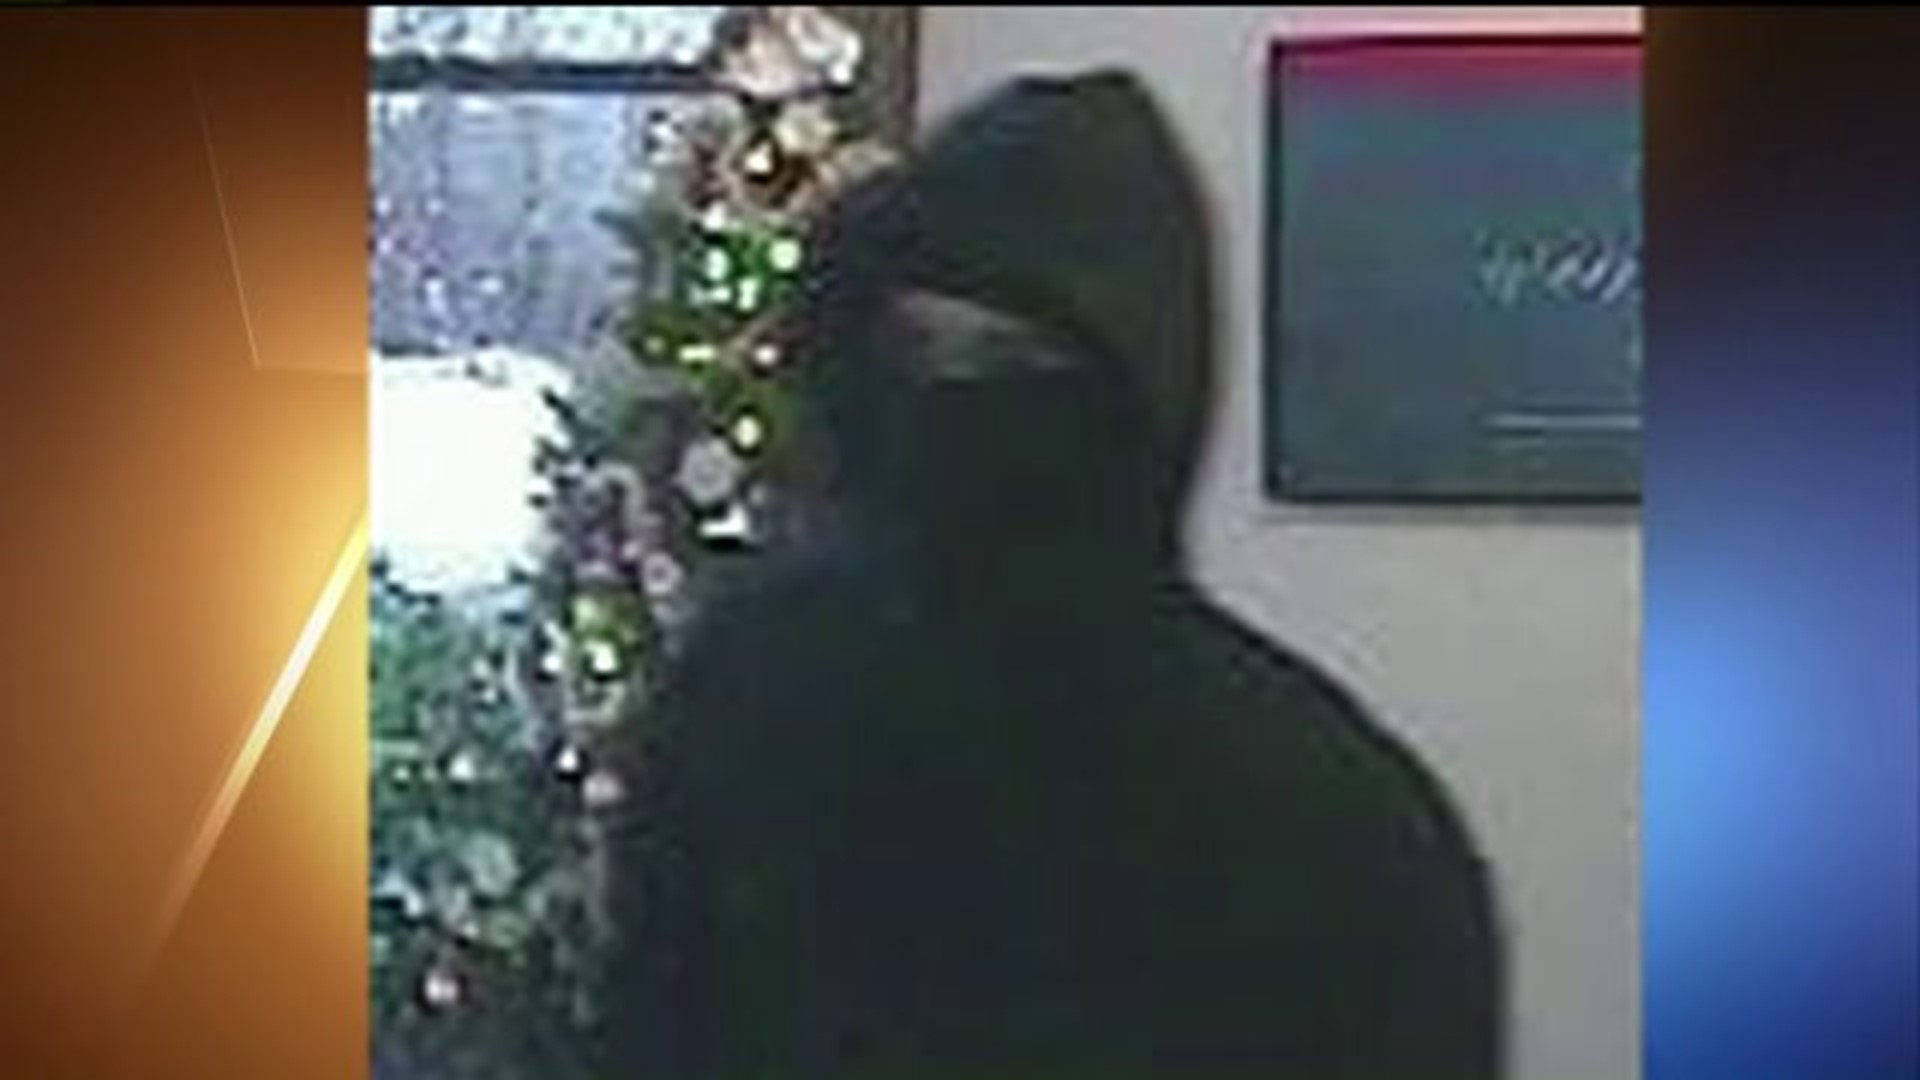 Police Searching for Armed Bank Robber in the Poconos